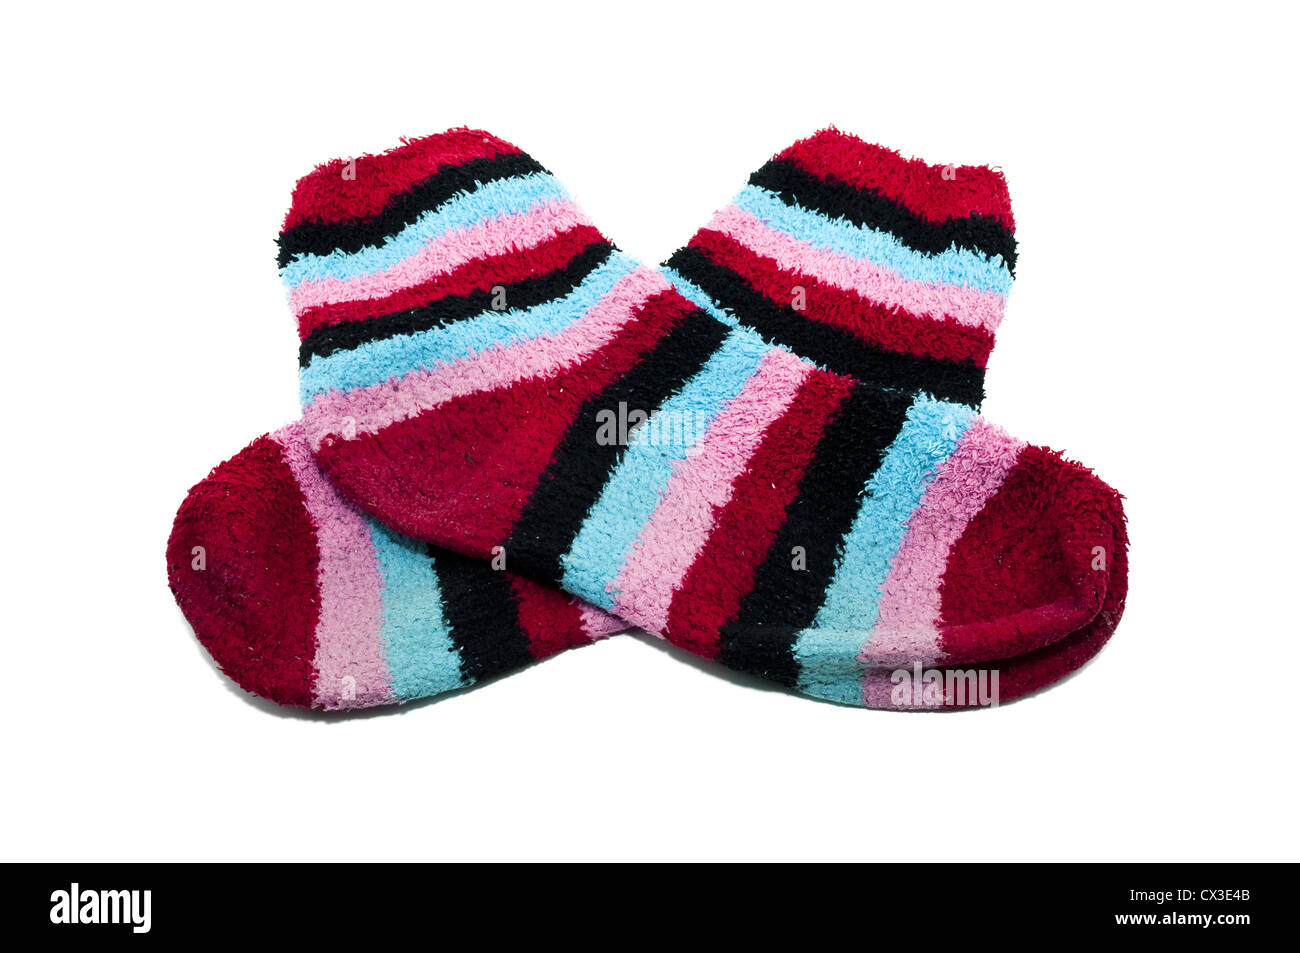 80+ Fuzzy Toe Socks Stock Photos, Pictures & Royalty-Free Images - iStock